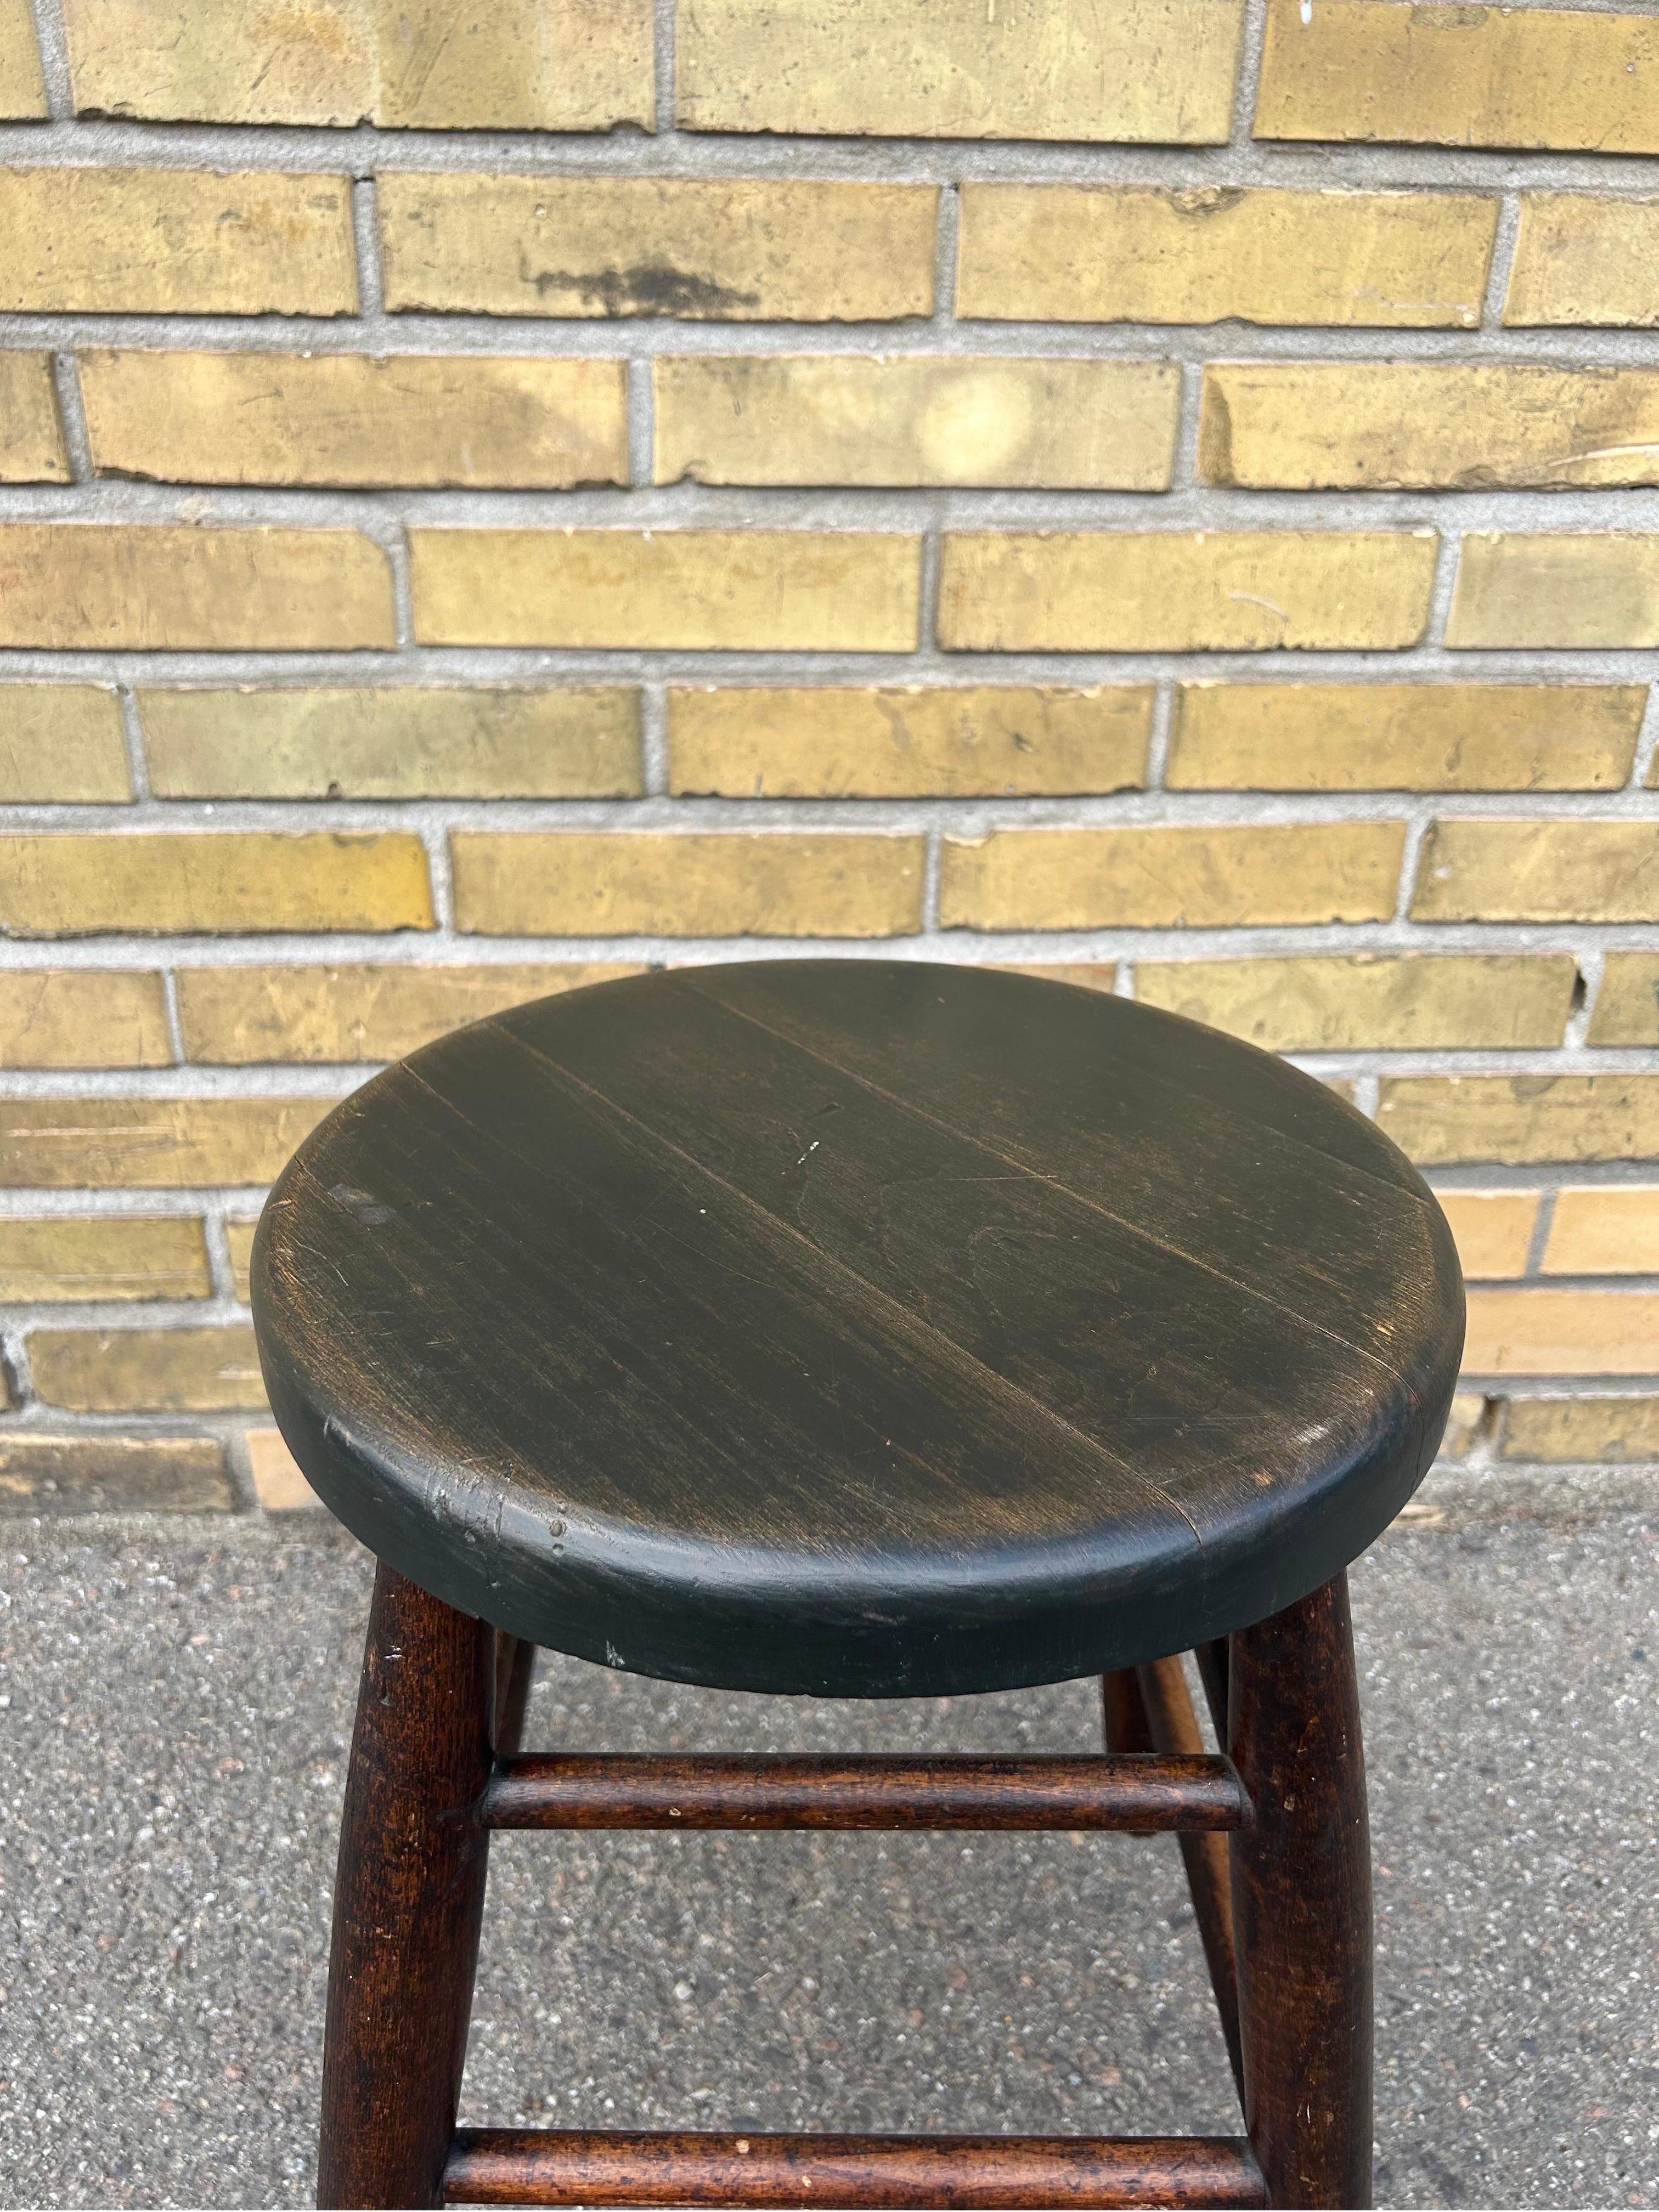 Rustic wabi Sabi style of milking stool in solid dark stained beechwood made in Denmark in the 1950s.

The stool is in good condition with a beautiful and signs of use which adds charm to the stool.
The stool is similar to French stools which